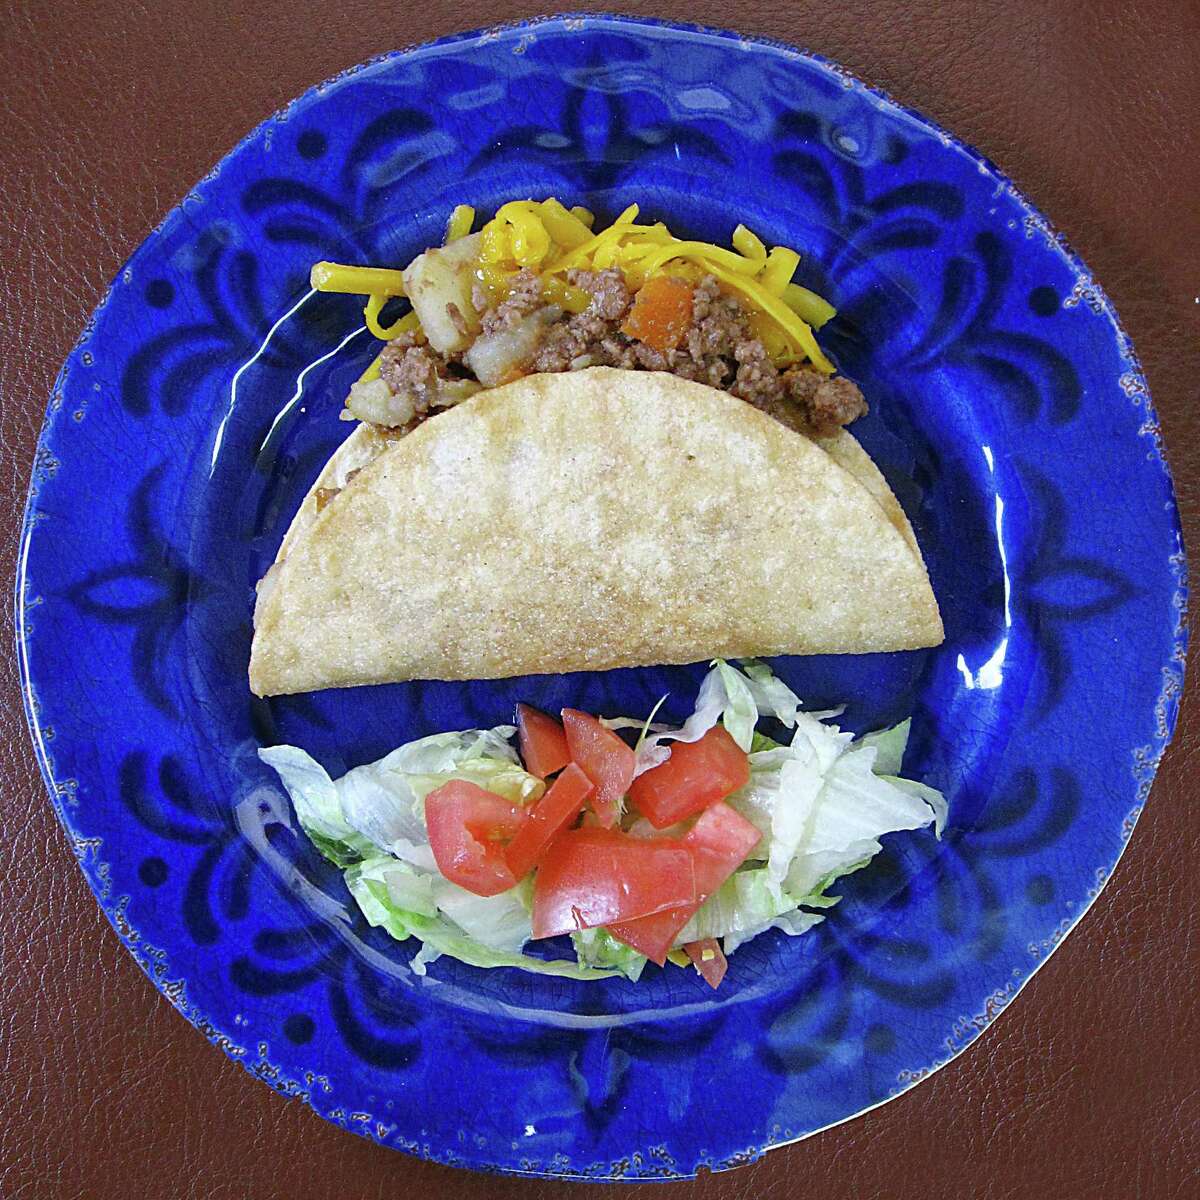 Crispy beef taco from Family Mexican Restaurant on U.S. 181 South.